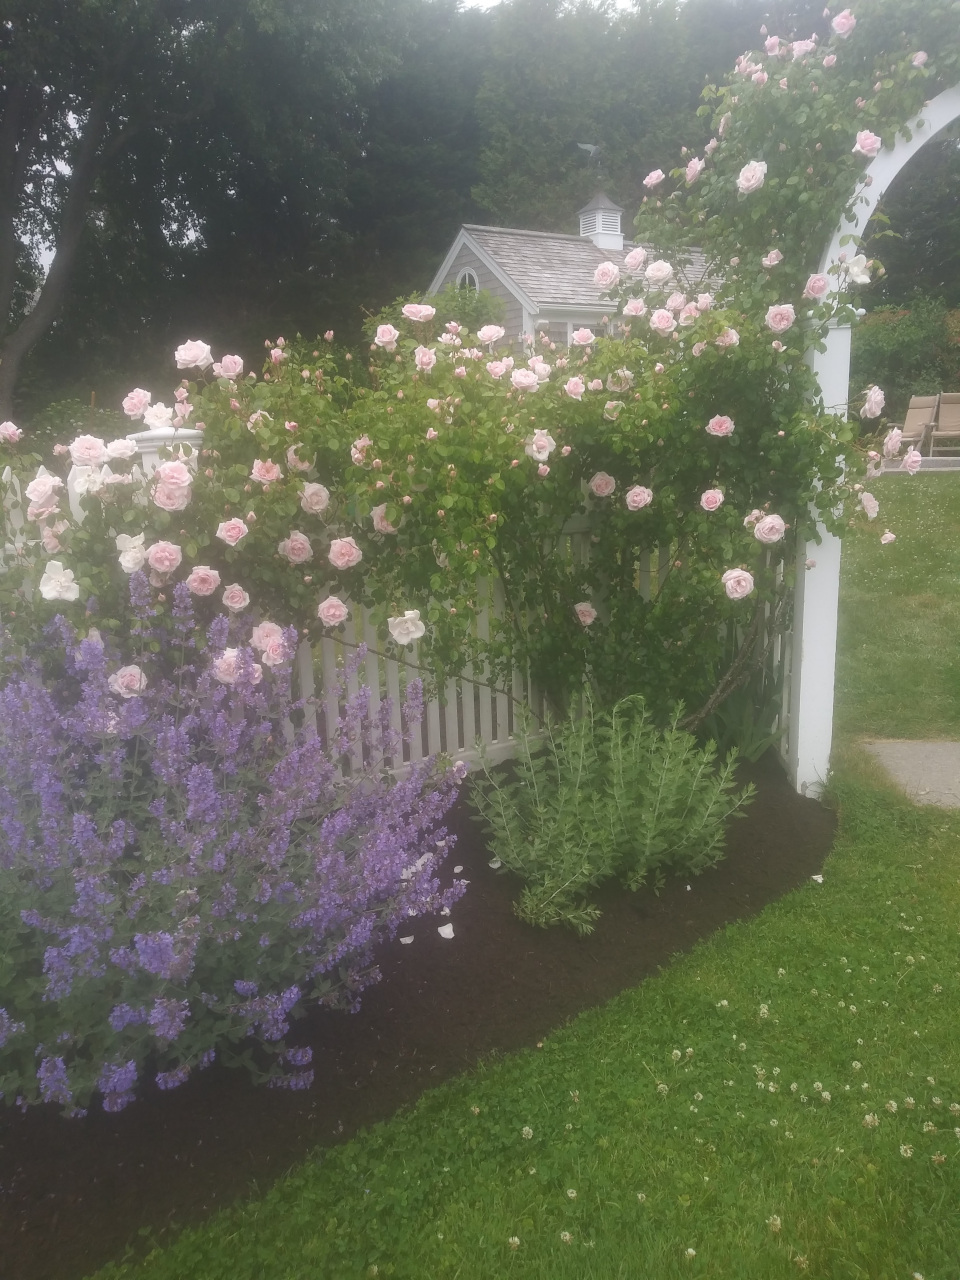 Roses and flowers growing through a white fence